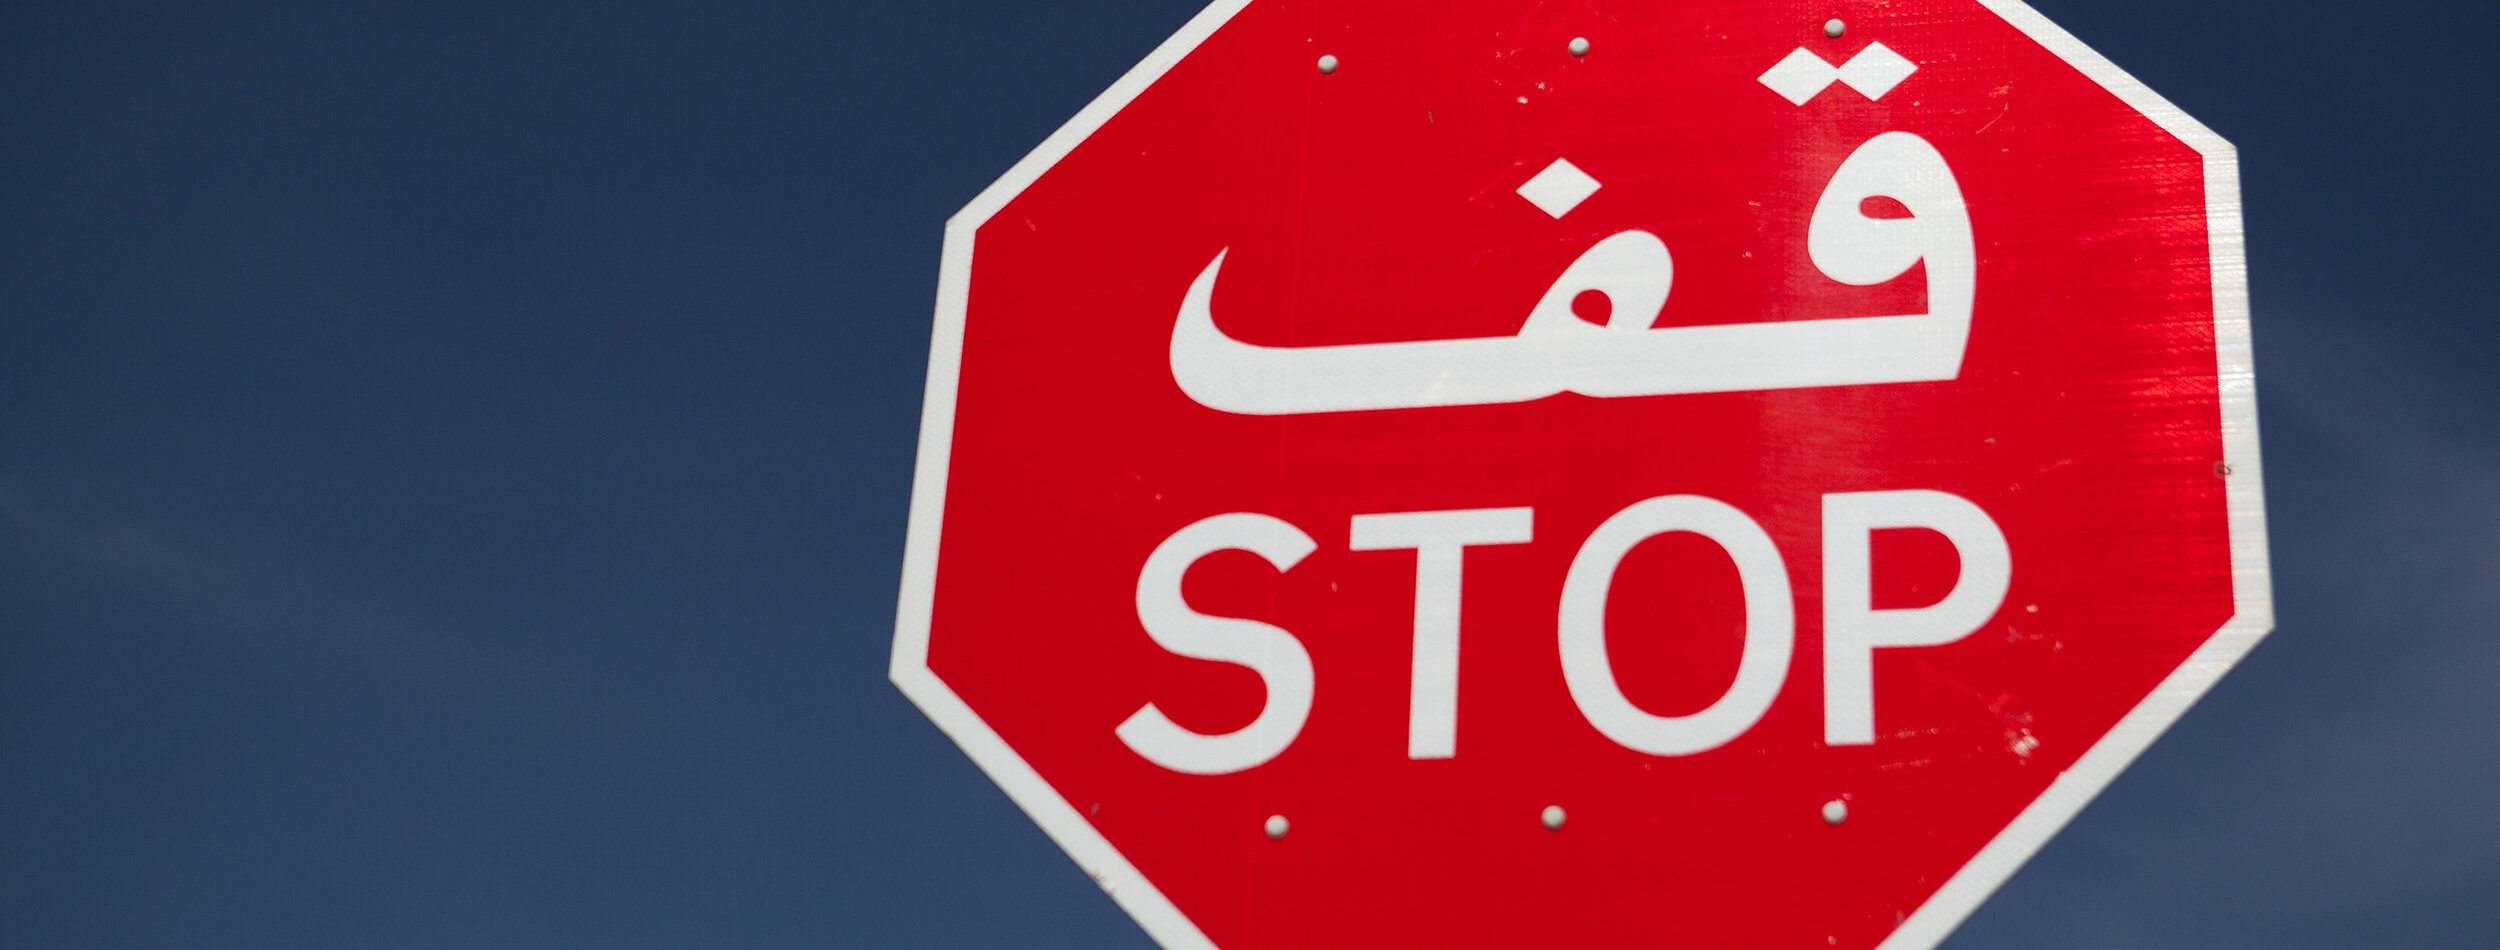 Traffic sign with text STOP in Arab language